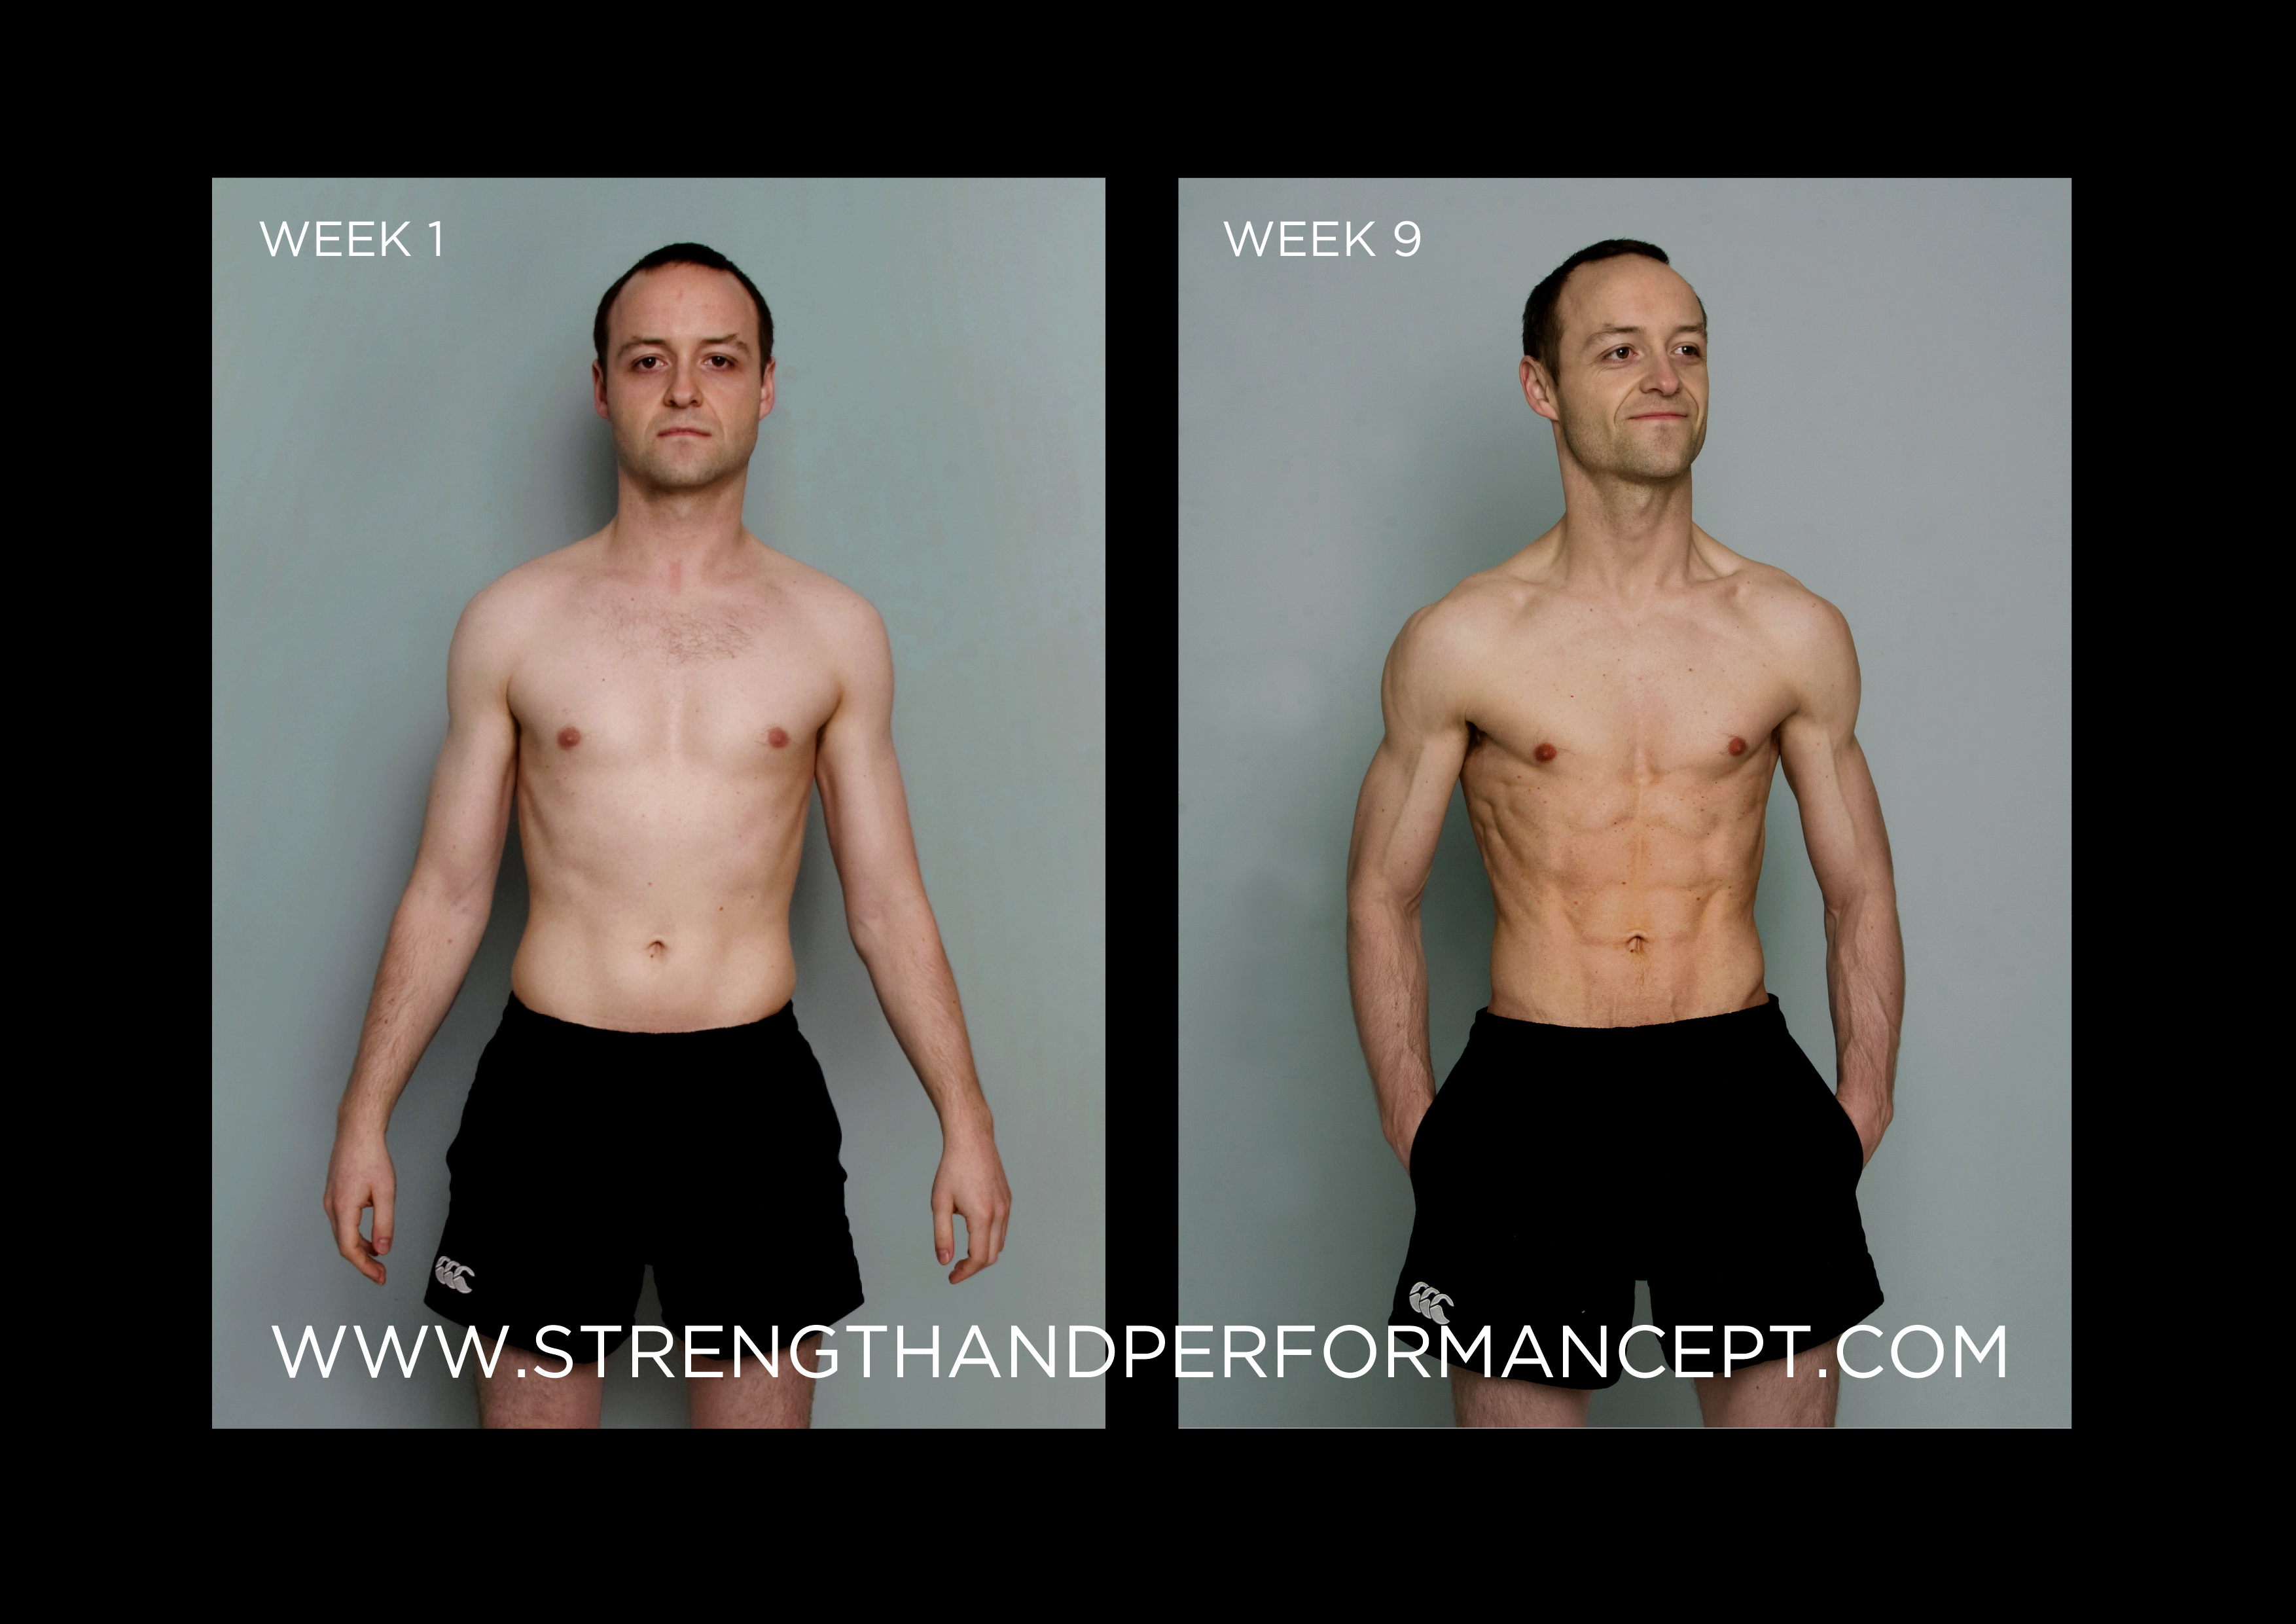 Another Great Body Transformation Complete |